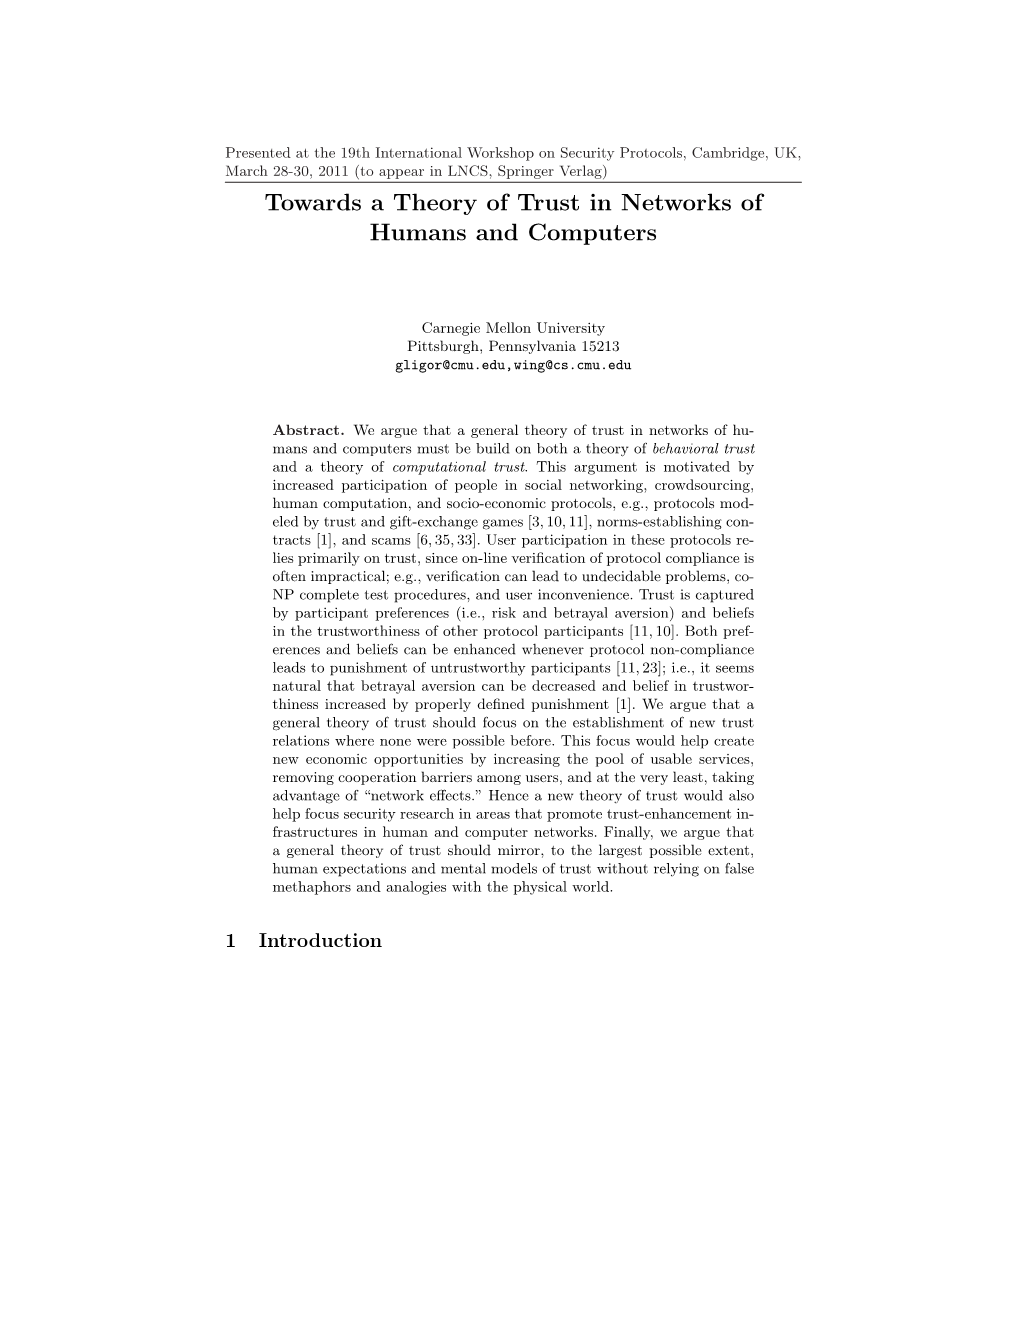 Towards a Theory of Trust in Networks of Humans and Computers